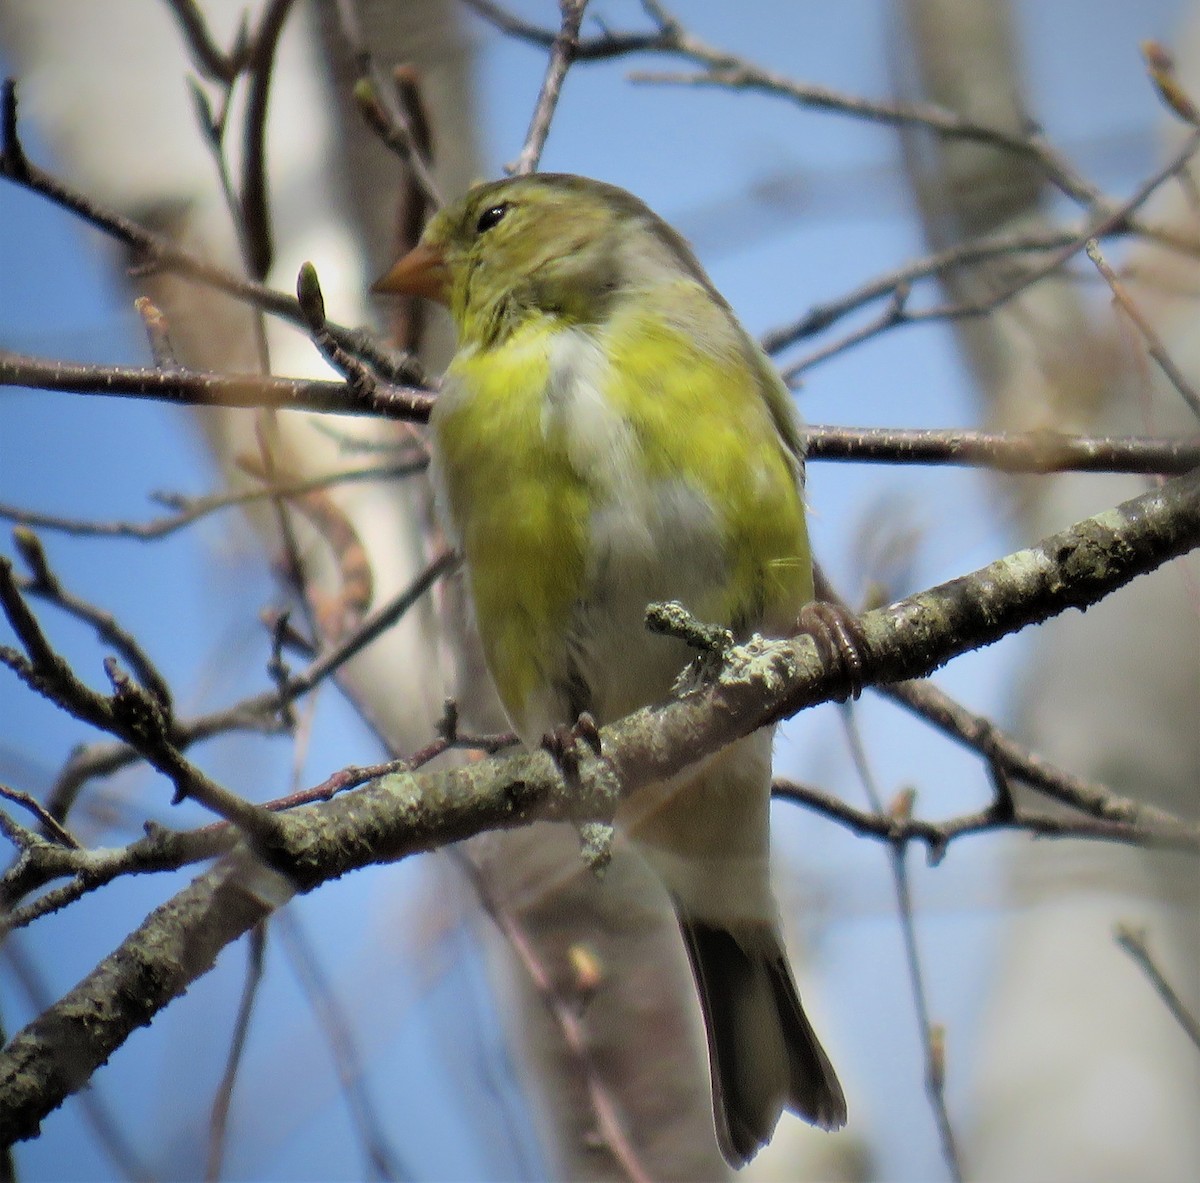 American Goldfinch - judy parrot-willis